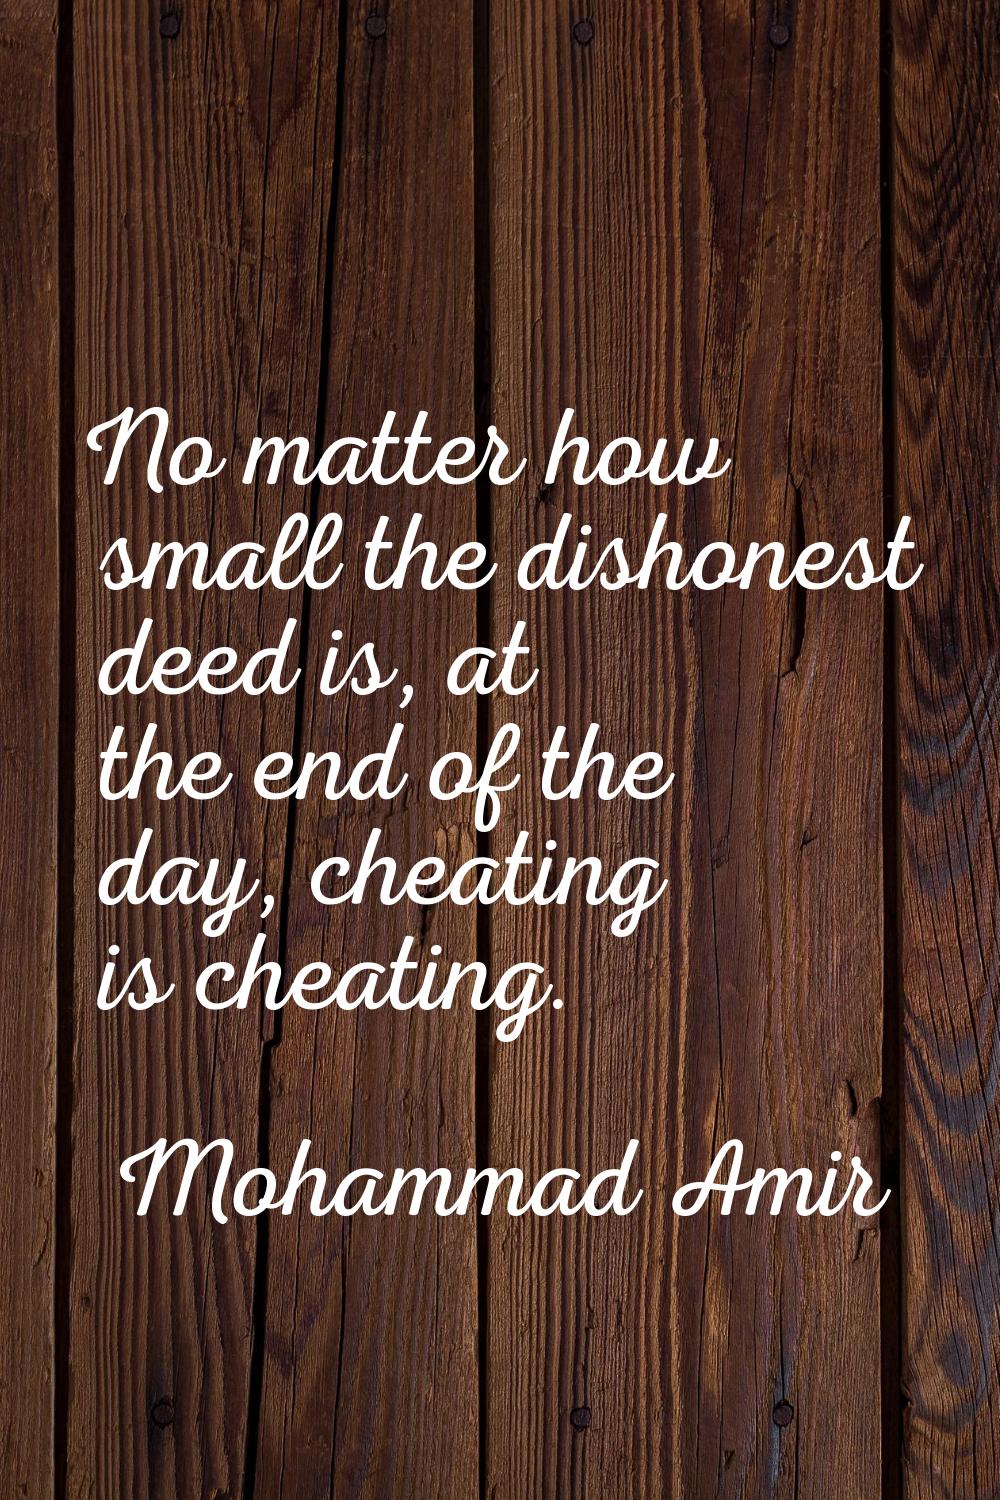 No matter how small the dishonest deed is, at the end of the day, cheating is cheating.